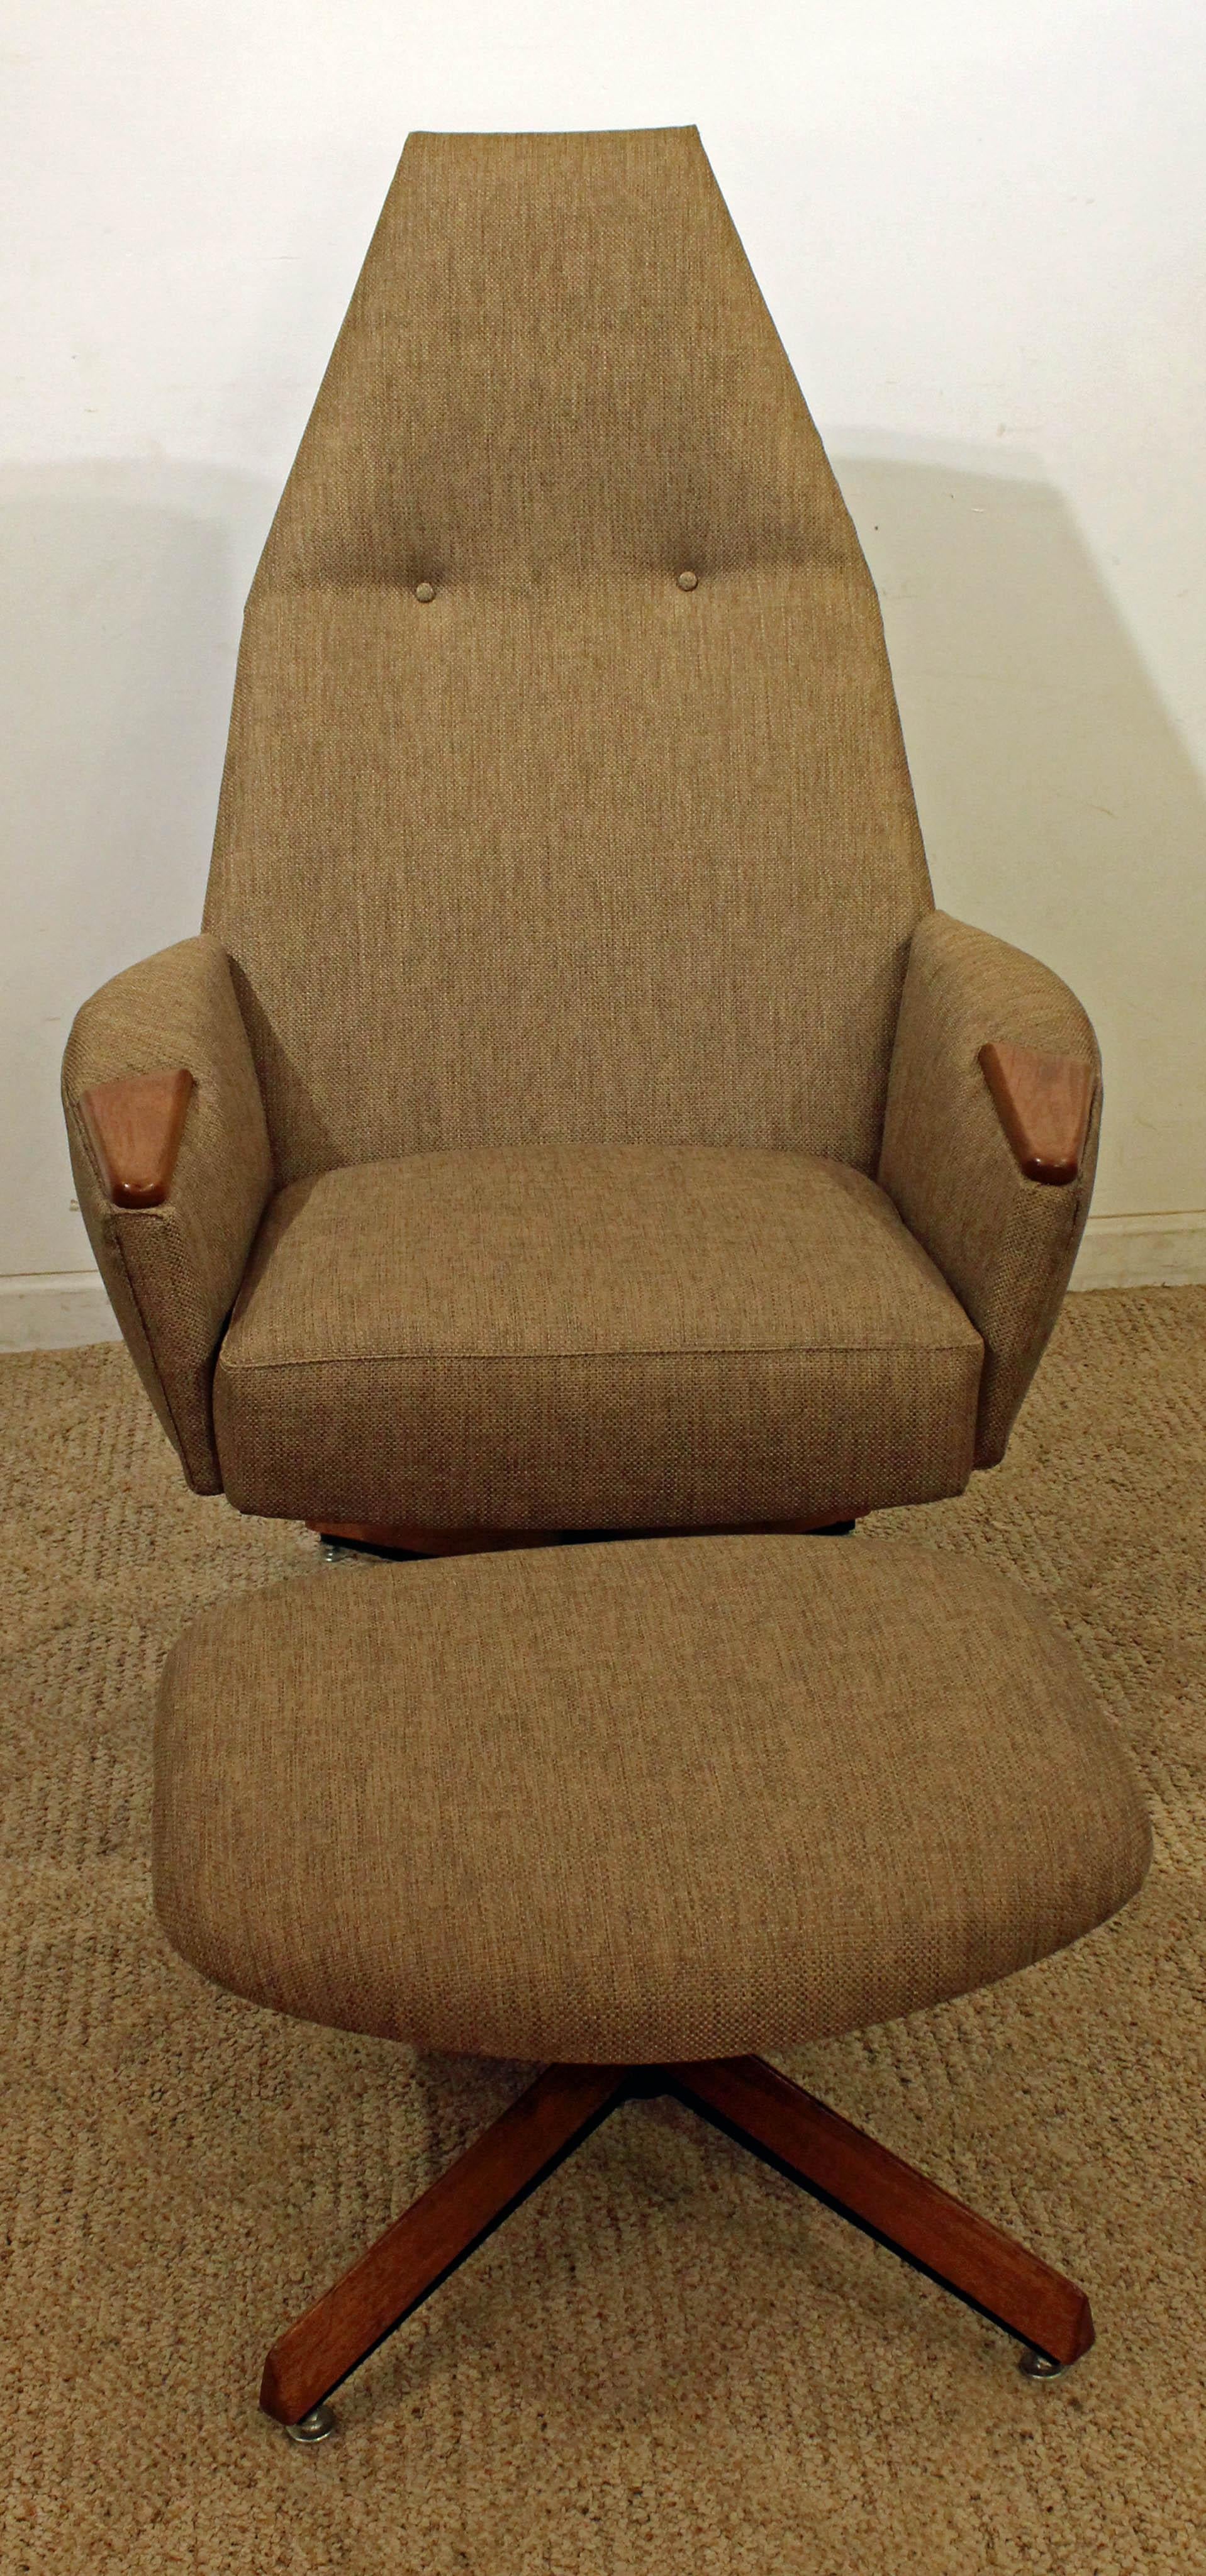 American Mid-Century Modern Adrian Pearsall Lounge Chair and Ottoman 2174C